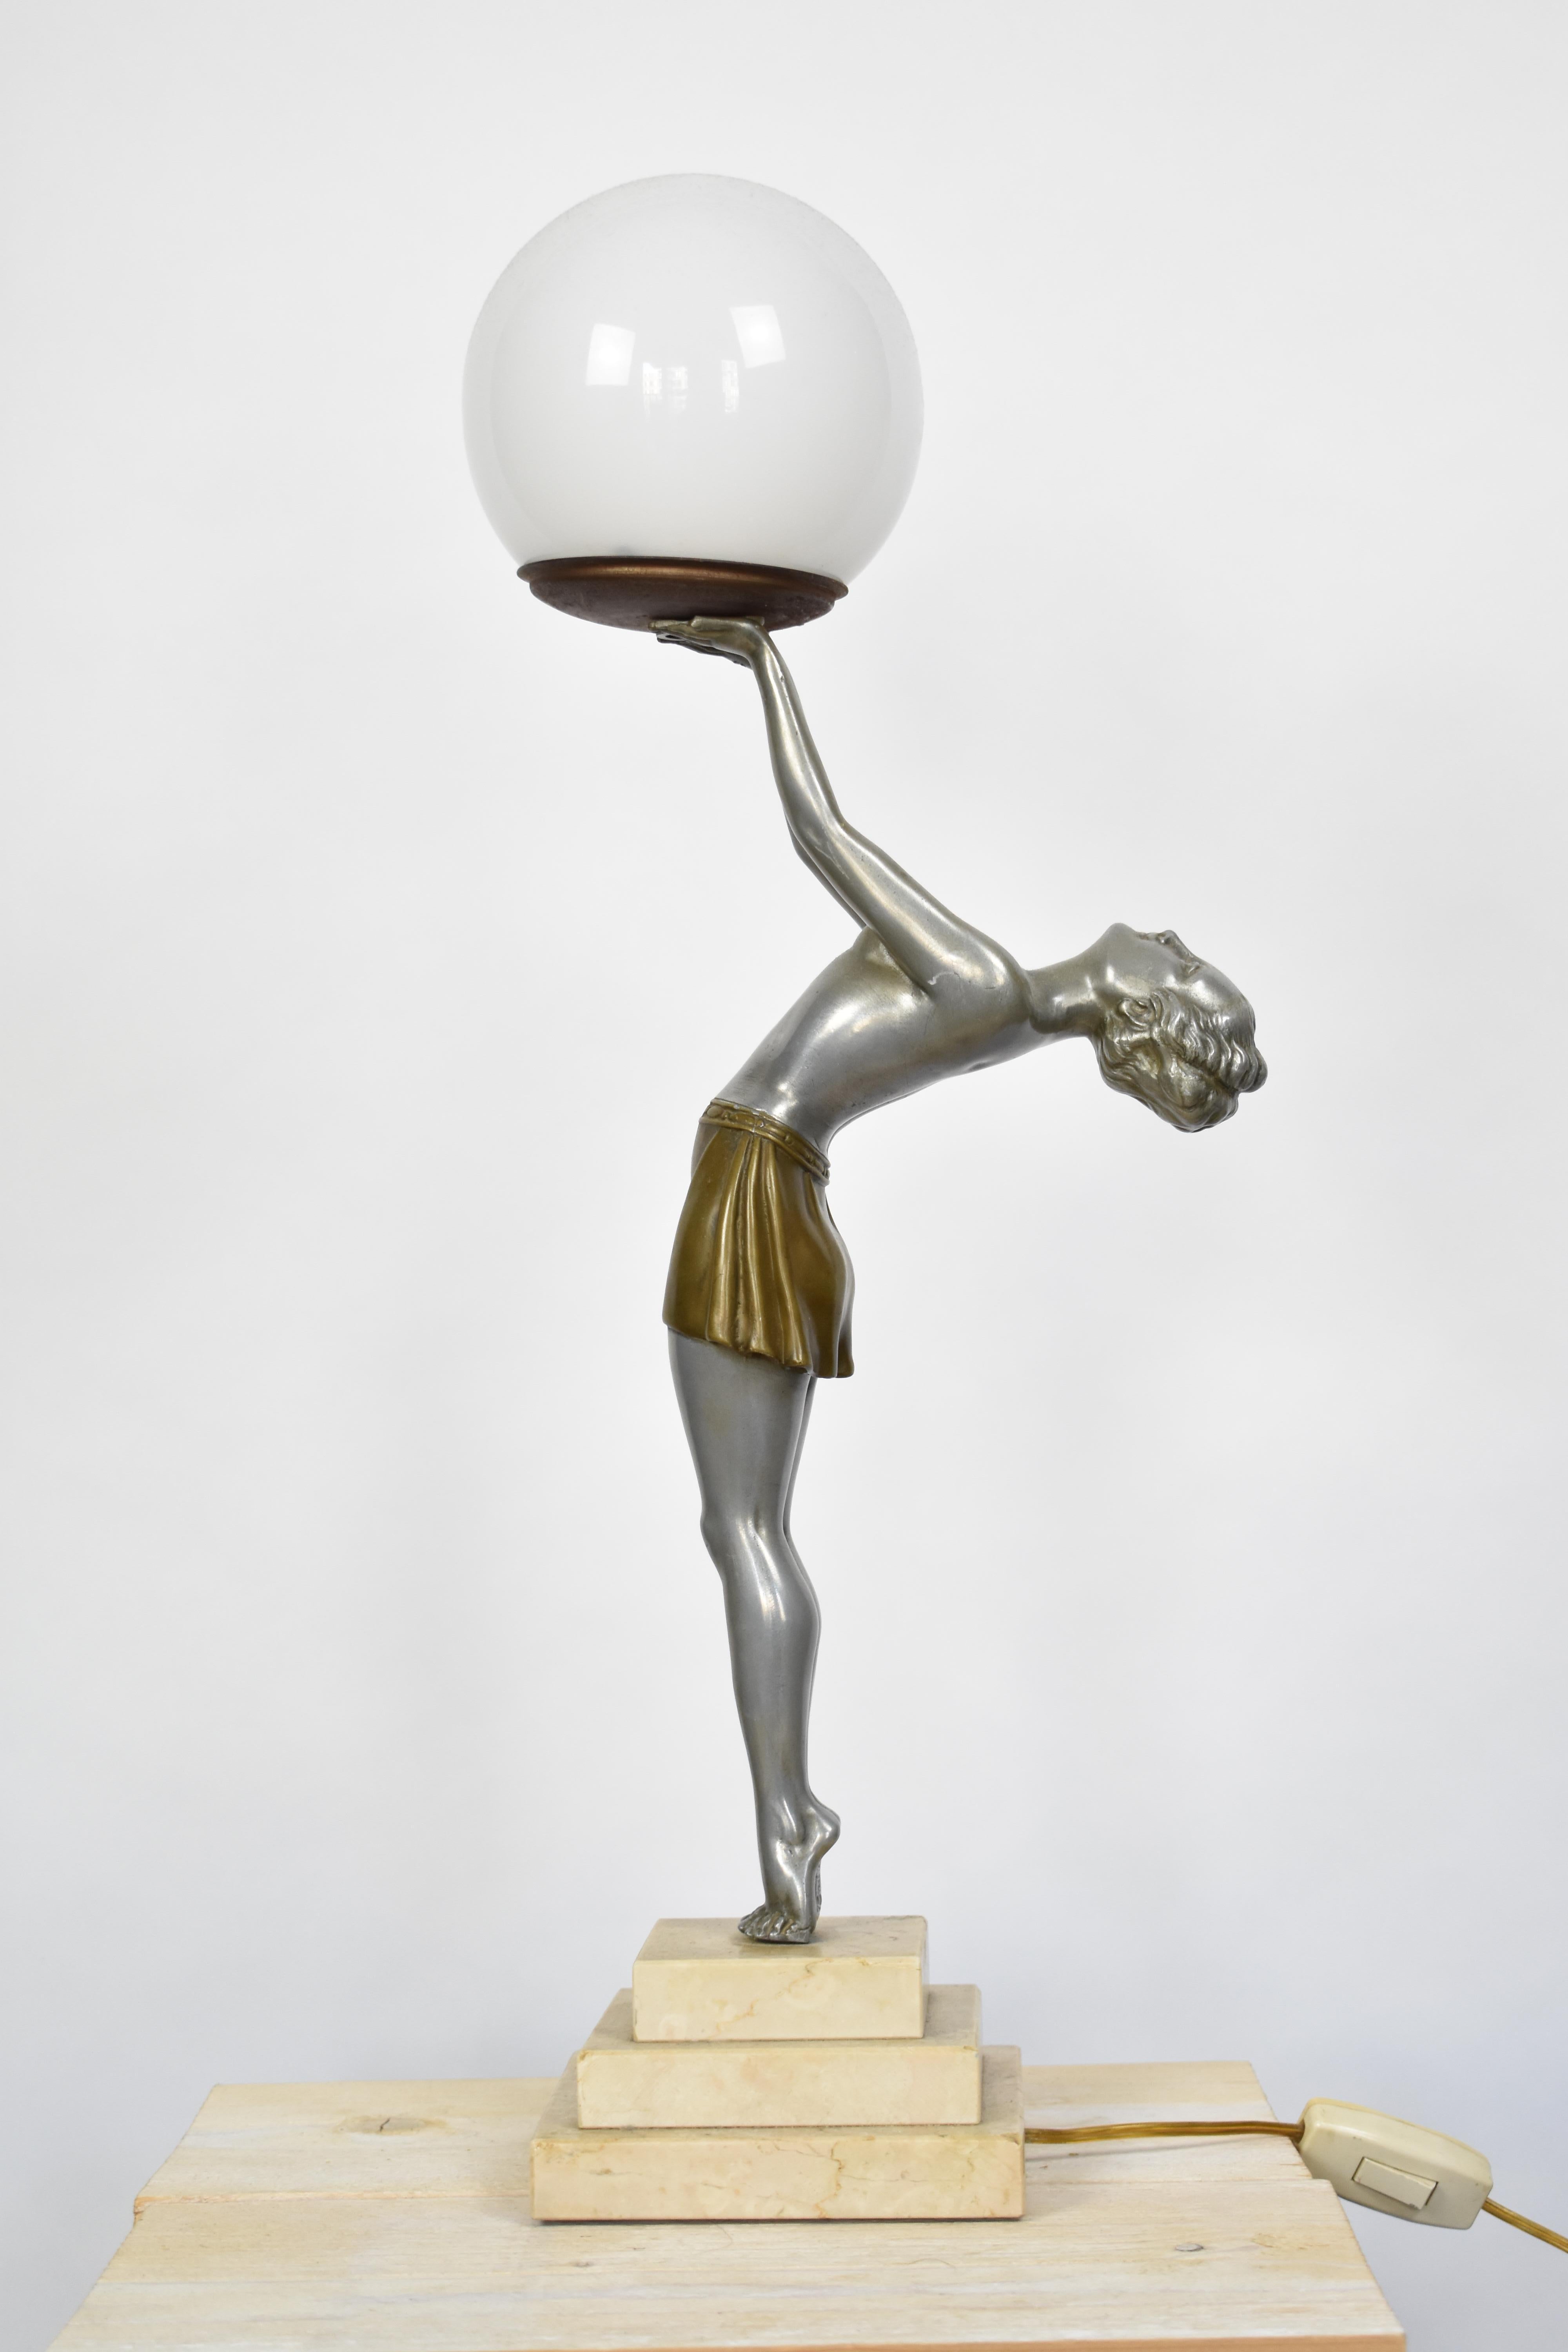 Information:
This original Art Deco piece features a nude woman holding a glass globe over her head. The globe lights up when turned on. The lamp is in the style of the famous Max Le Verrier lamps. However it is made by Enrique Molins-Balleste and